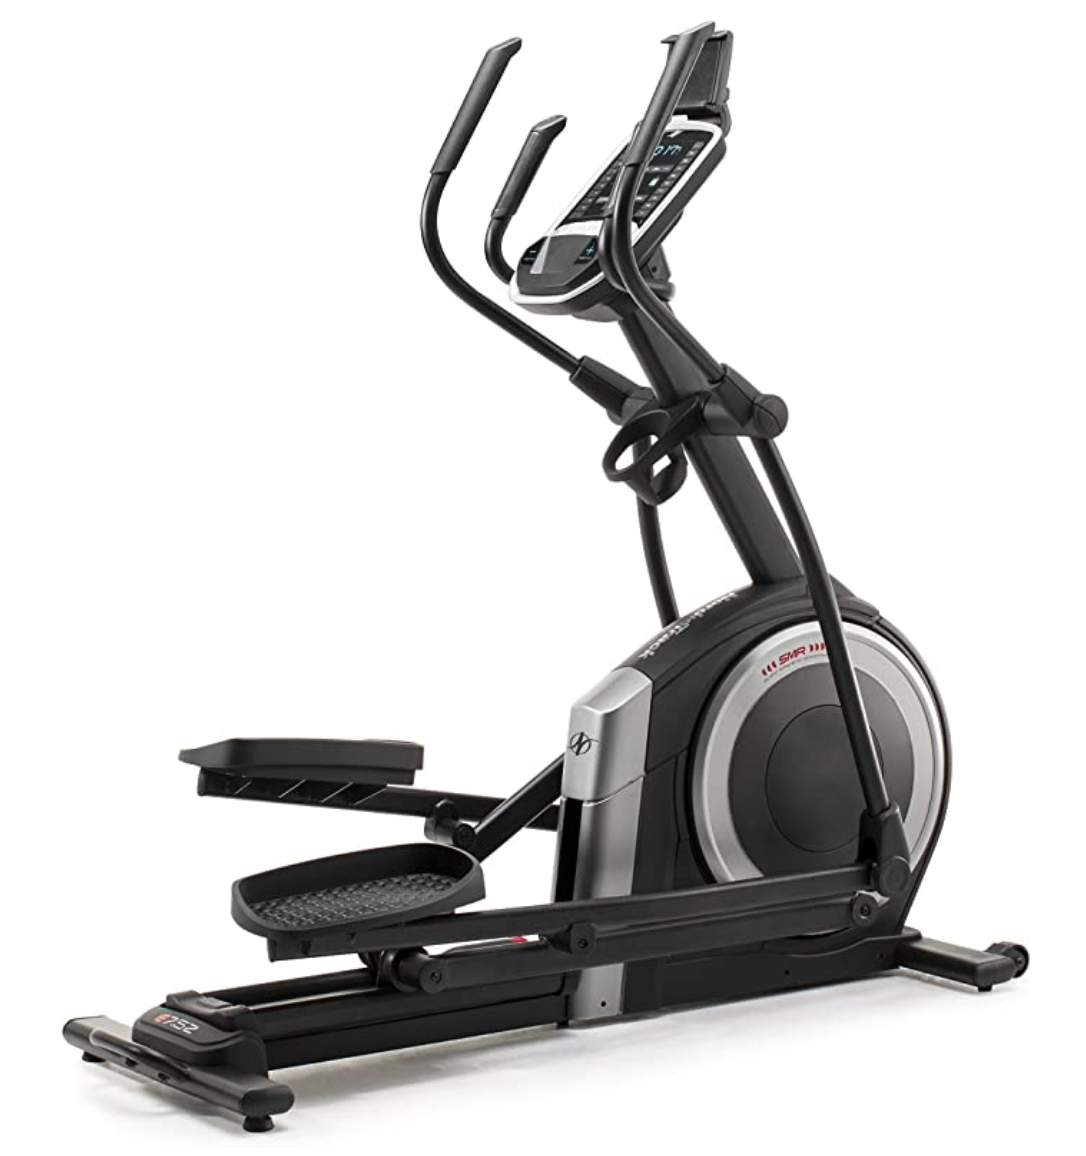 Best Elliptical Machines Rated By Our Editors - 2021 Edition | WalkJogRun